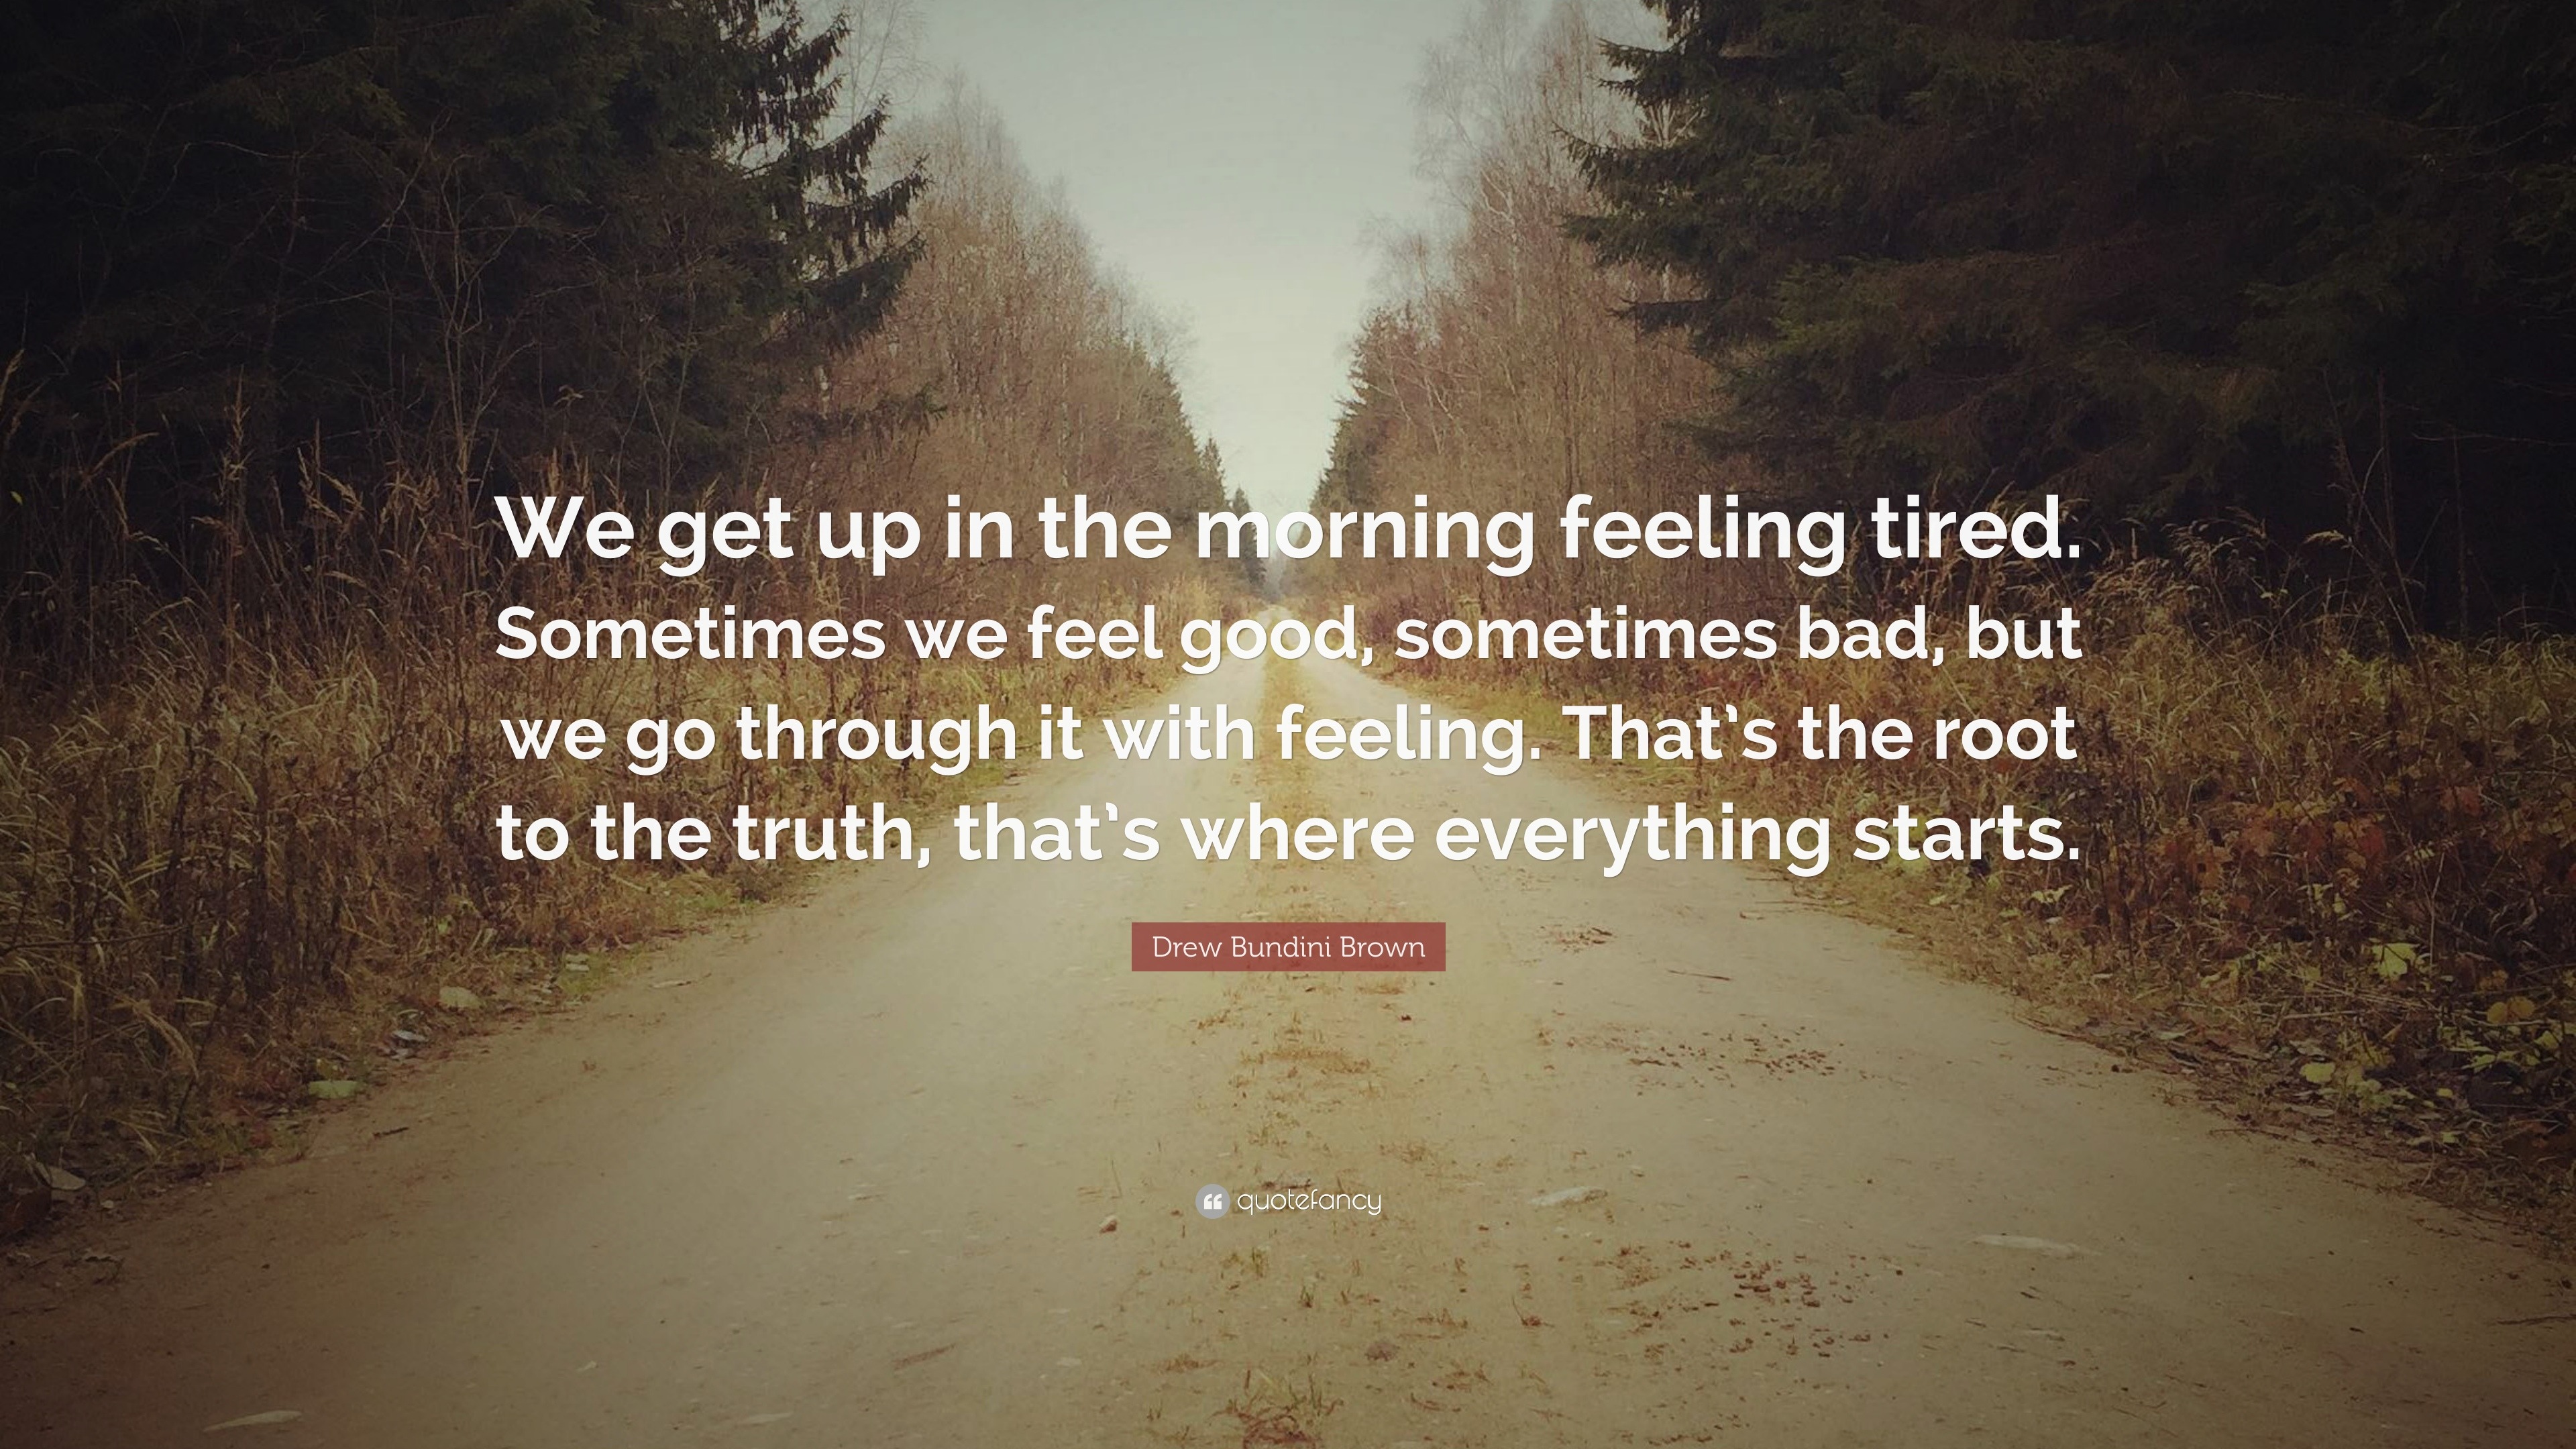 Drew Bundini Brown Quote “We get up in the morning feeling tired